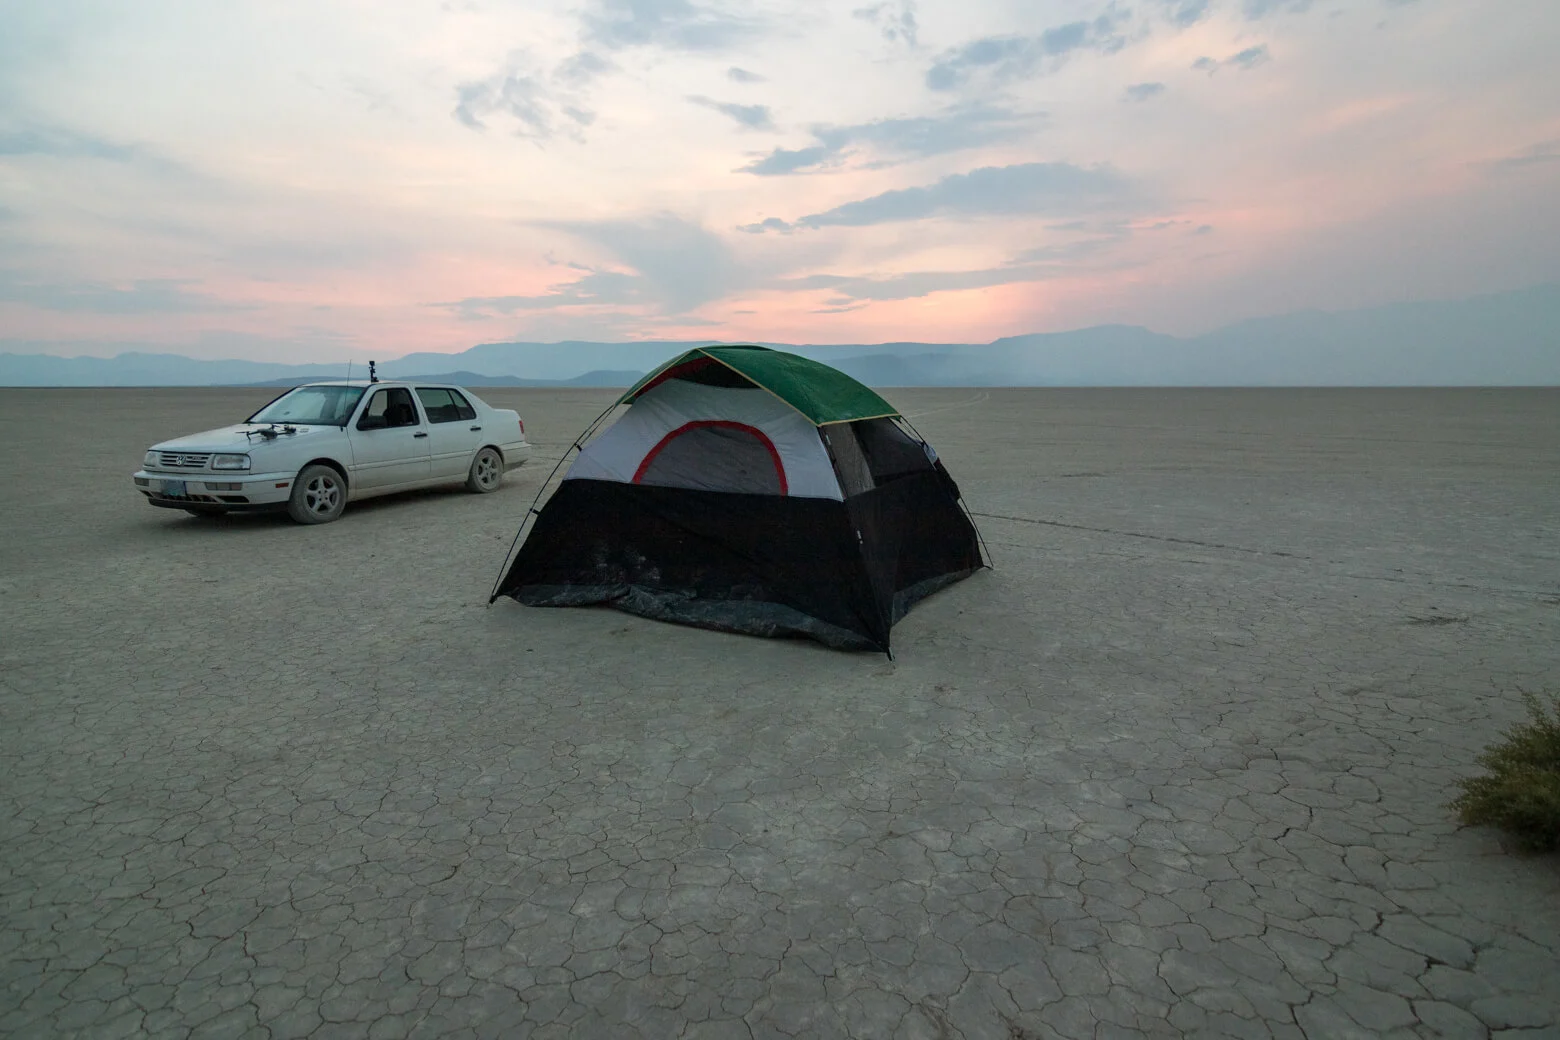 Camping in Alvord Desert is a fun thing to do on your Oregon road trip.